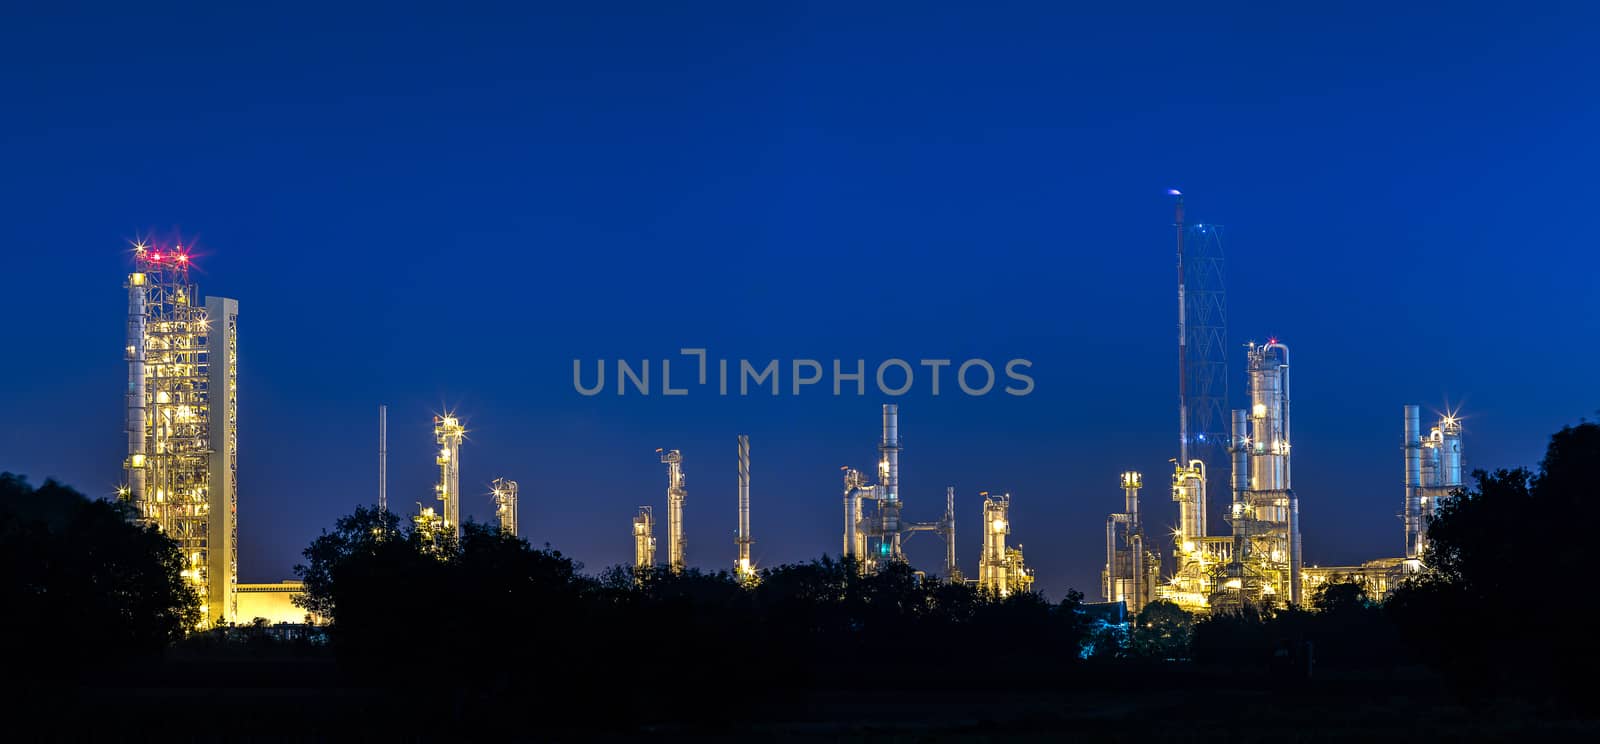 petrochemical and petroleum plant industry with refinery stack a by kunchainub